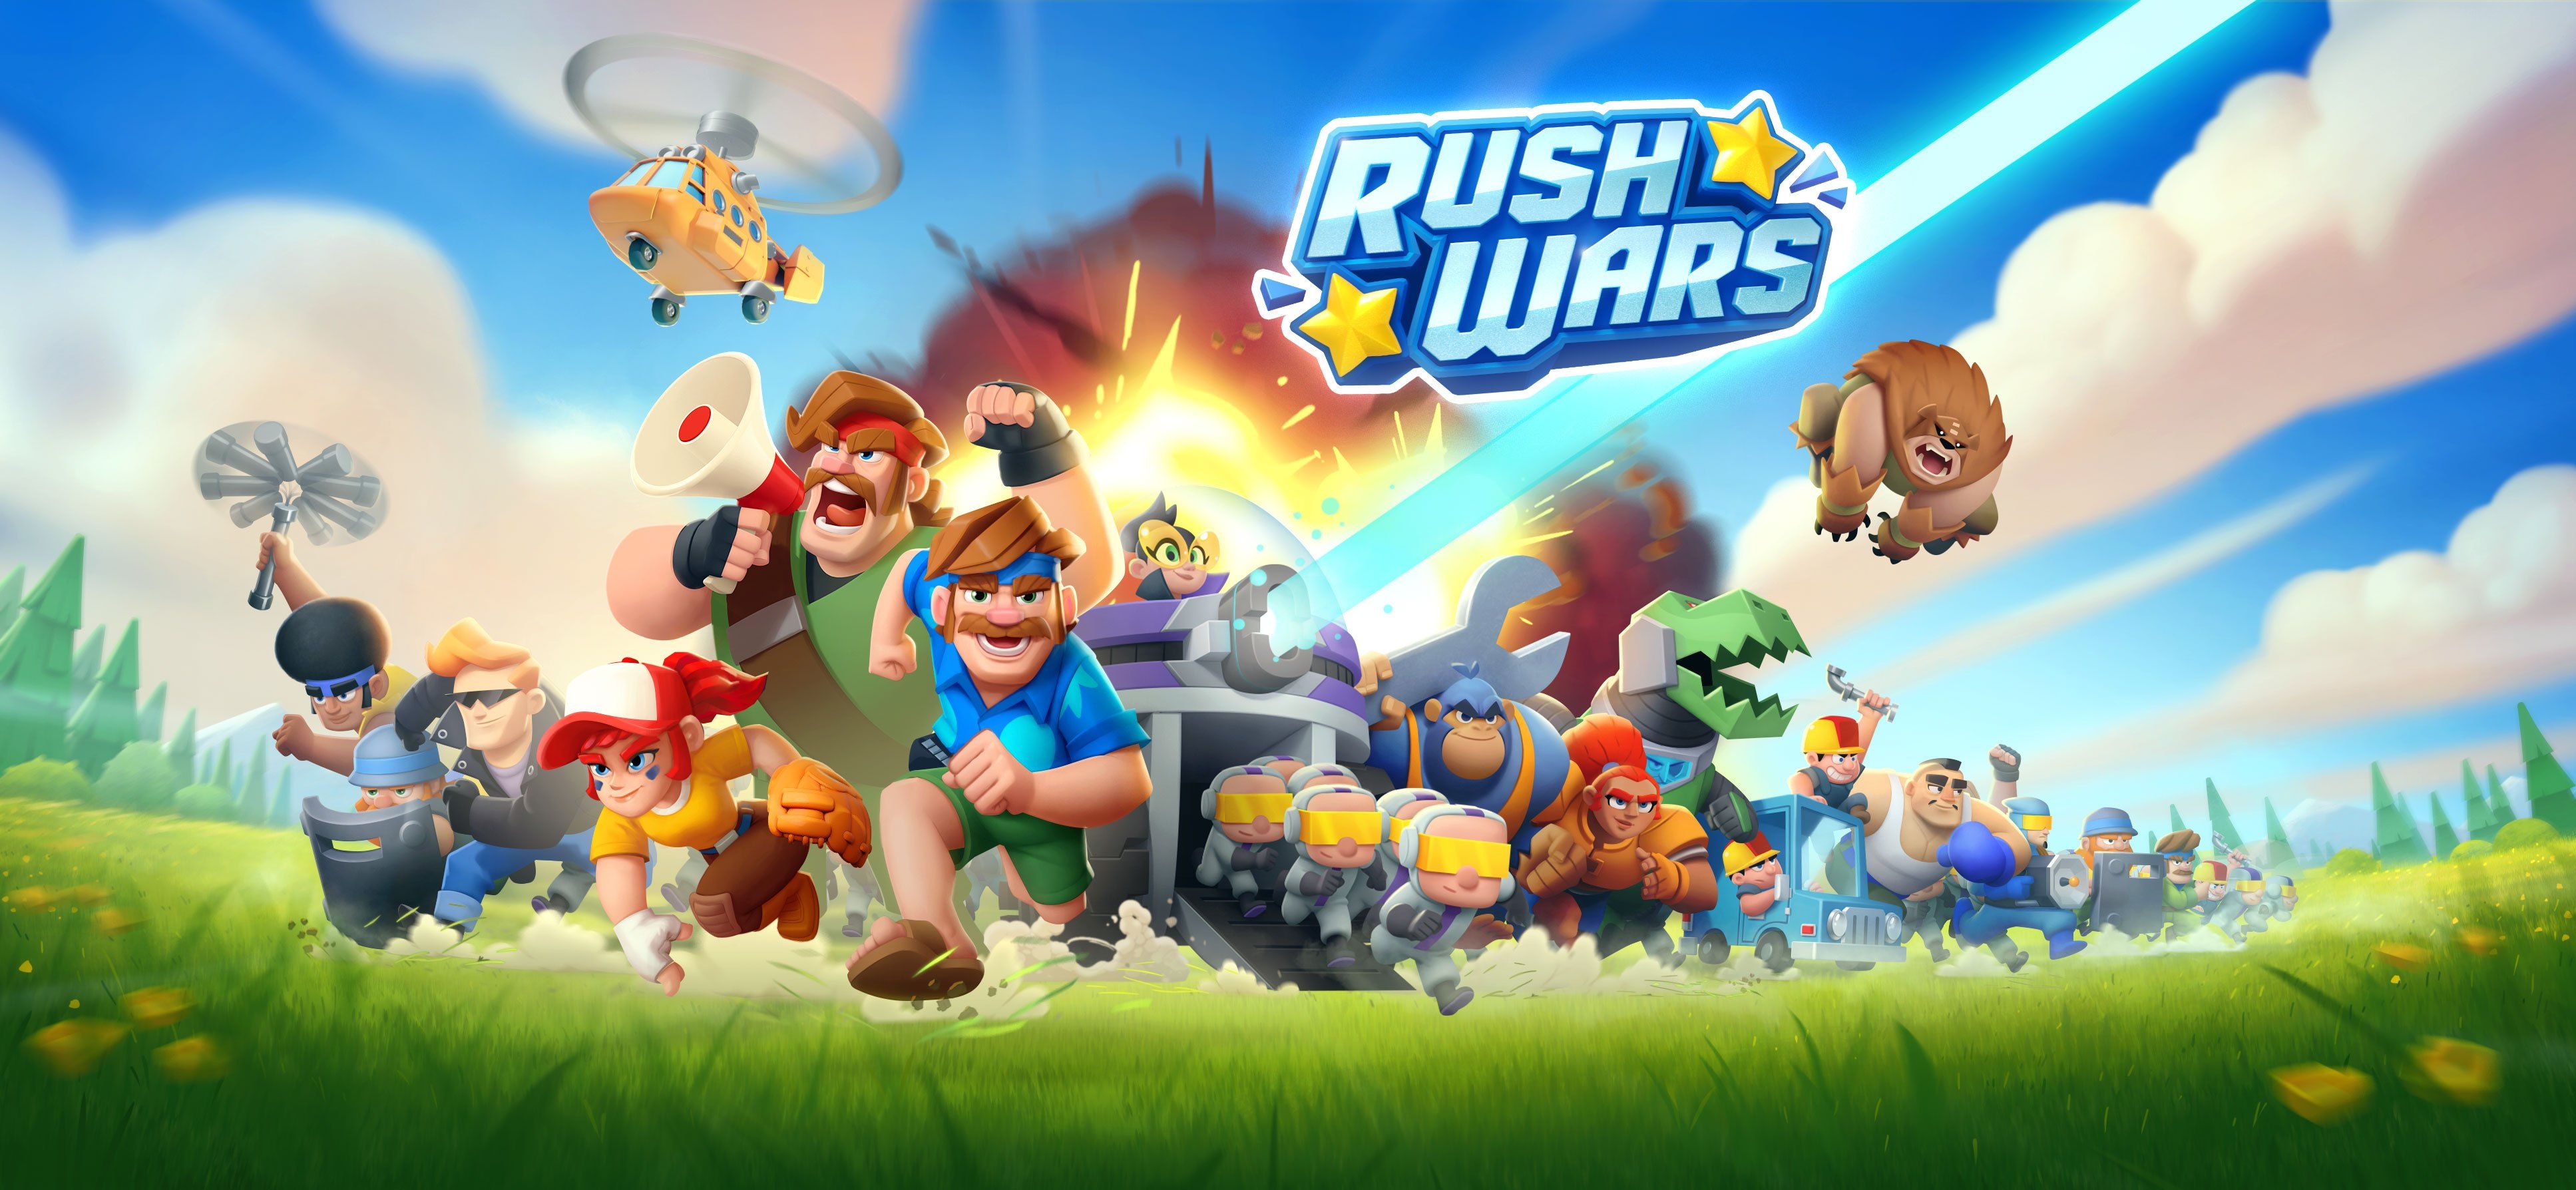 Rush Wars soft launches in Canada, Australia, and New Zealand!